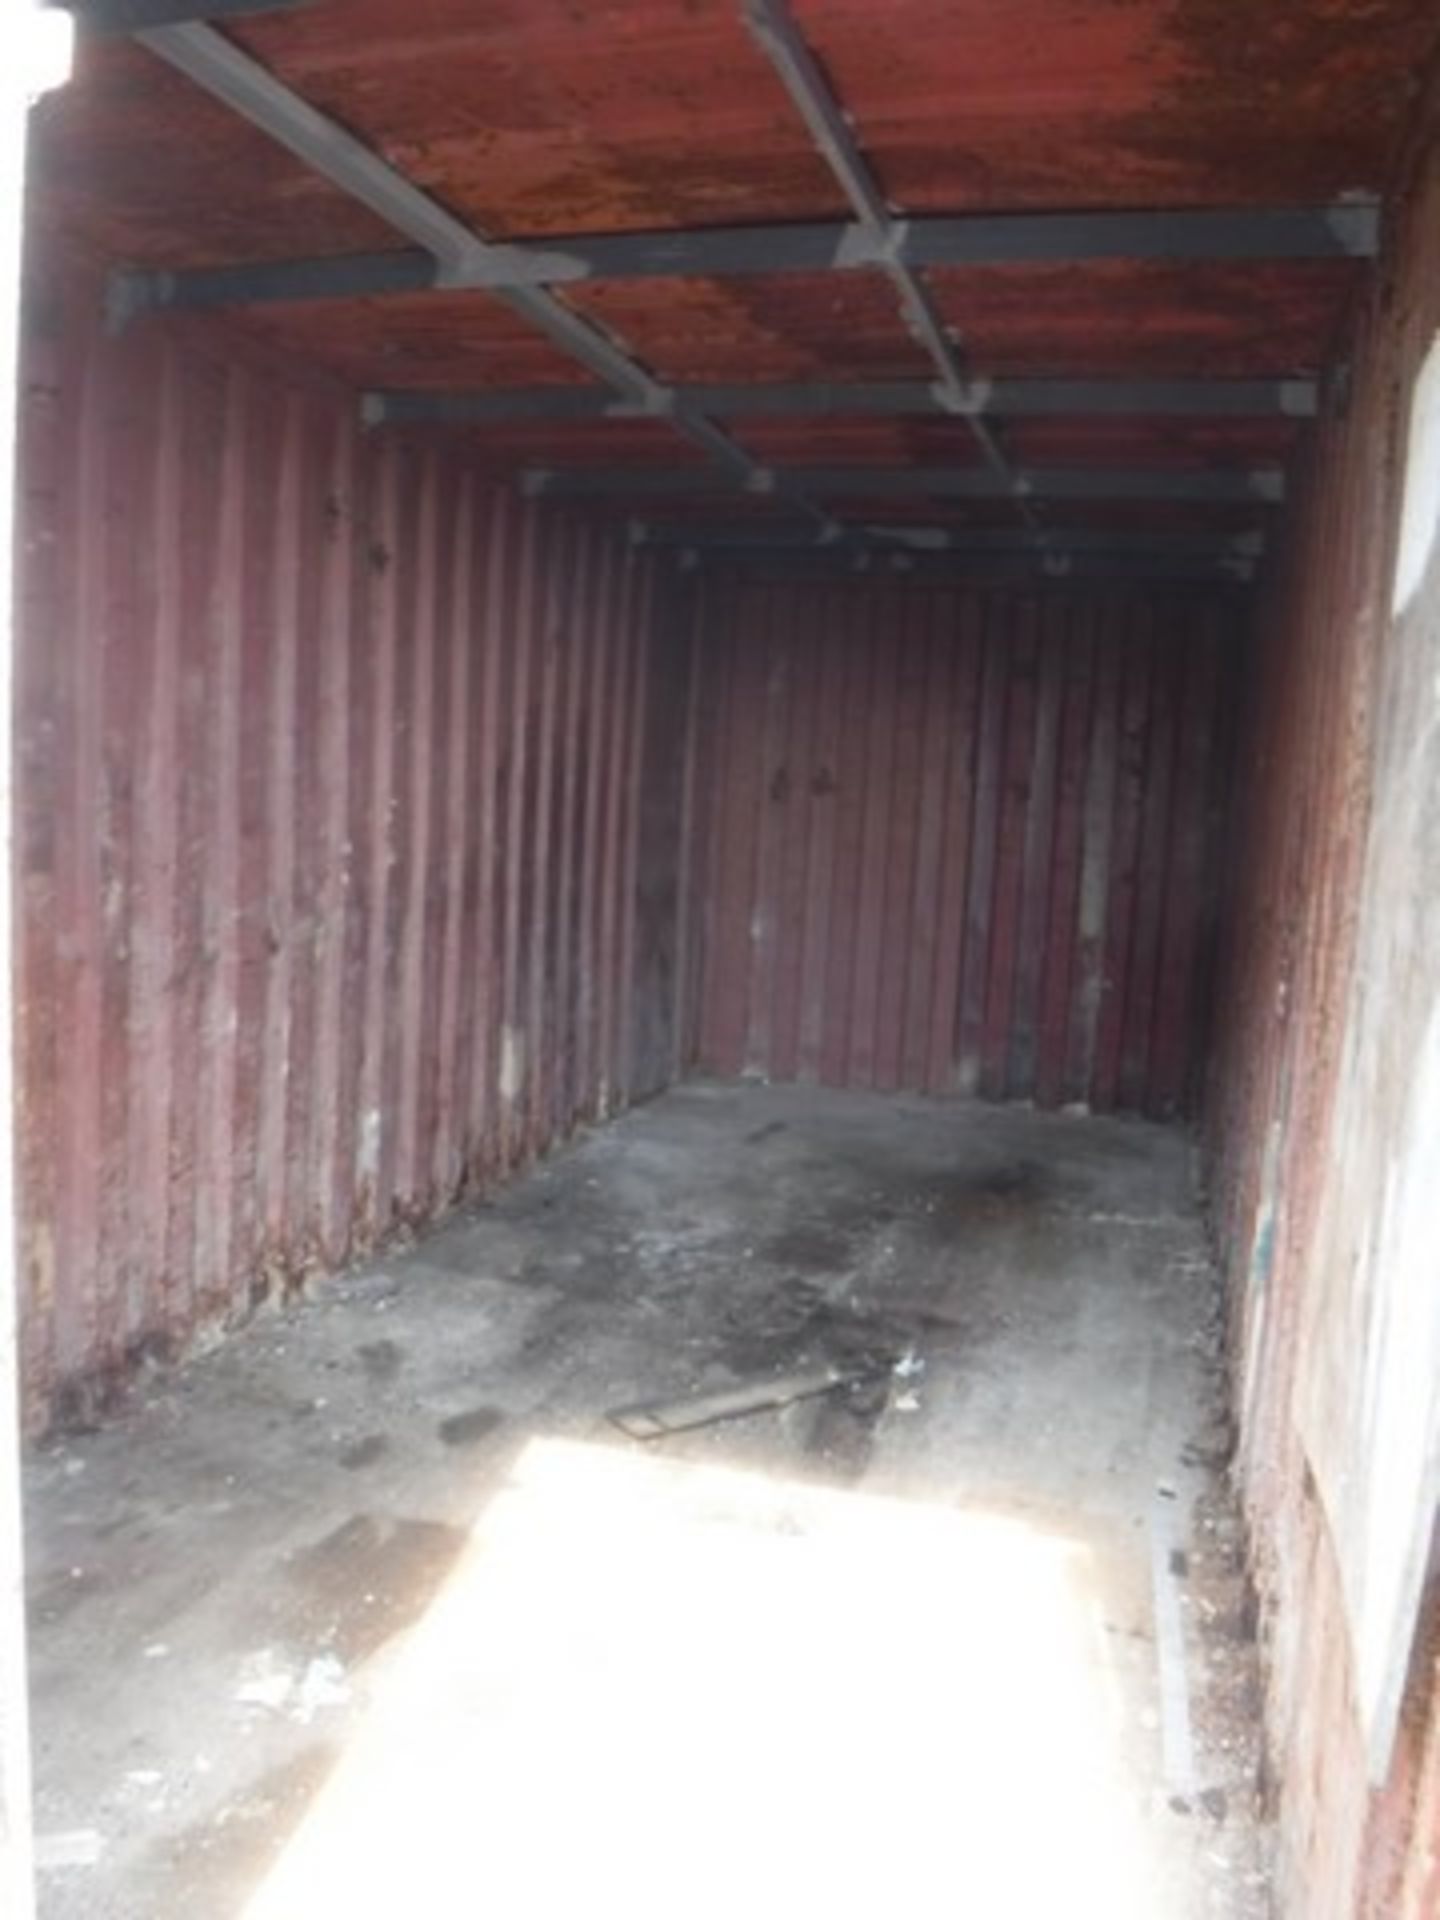 SHIPPING CONTAINER 20FT AN - SPT7506 - Image 4 of 6